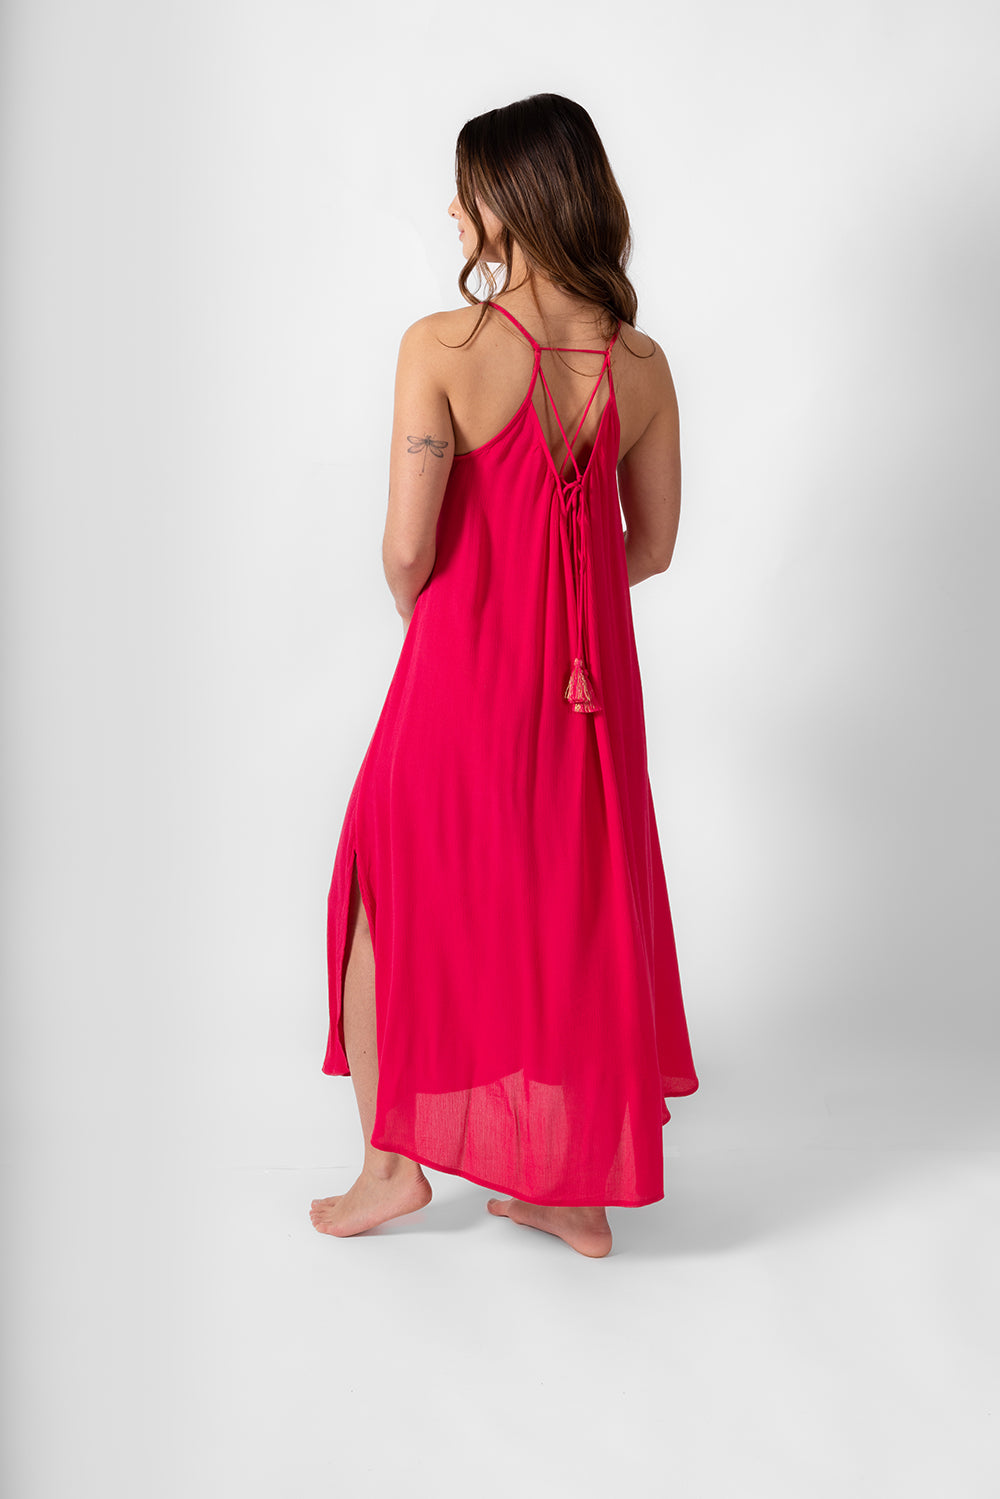 the back side of the a brunette model wearing raspberry colored strappy flowy midi dress with a sicde slipt up to the knee